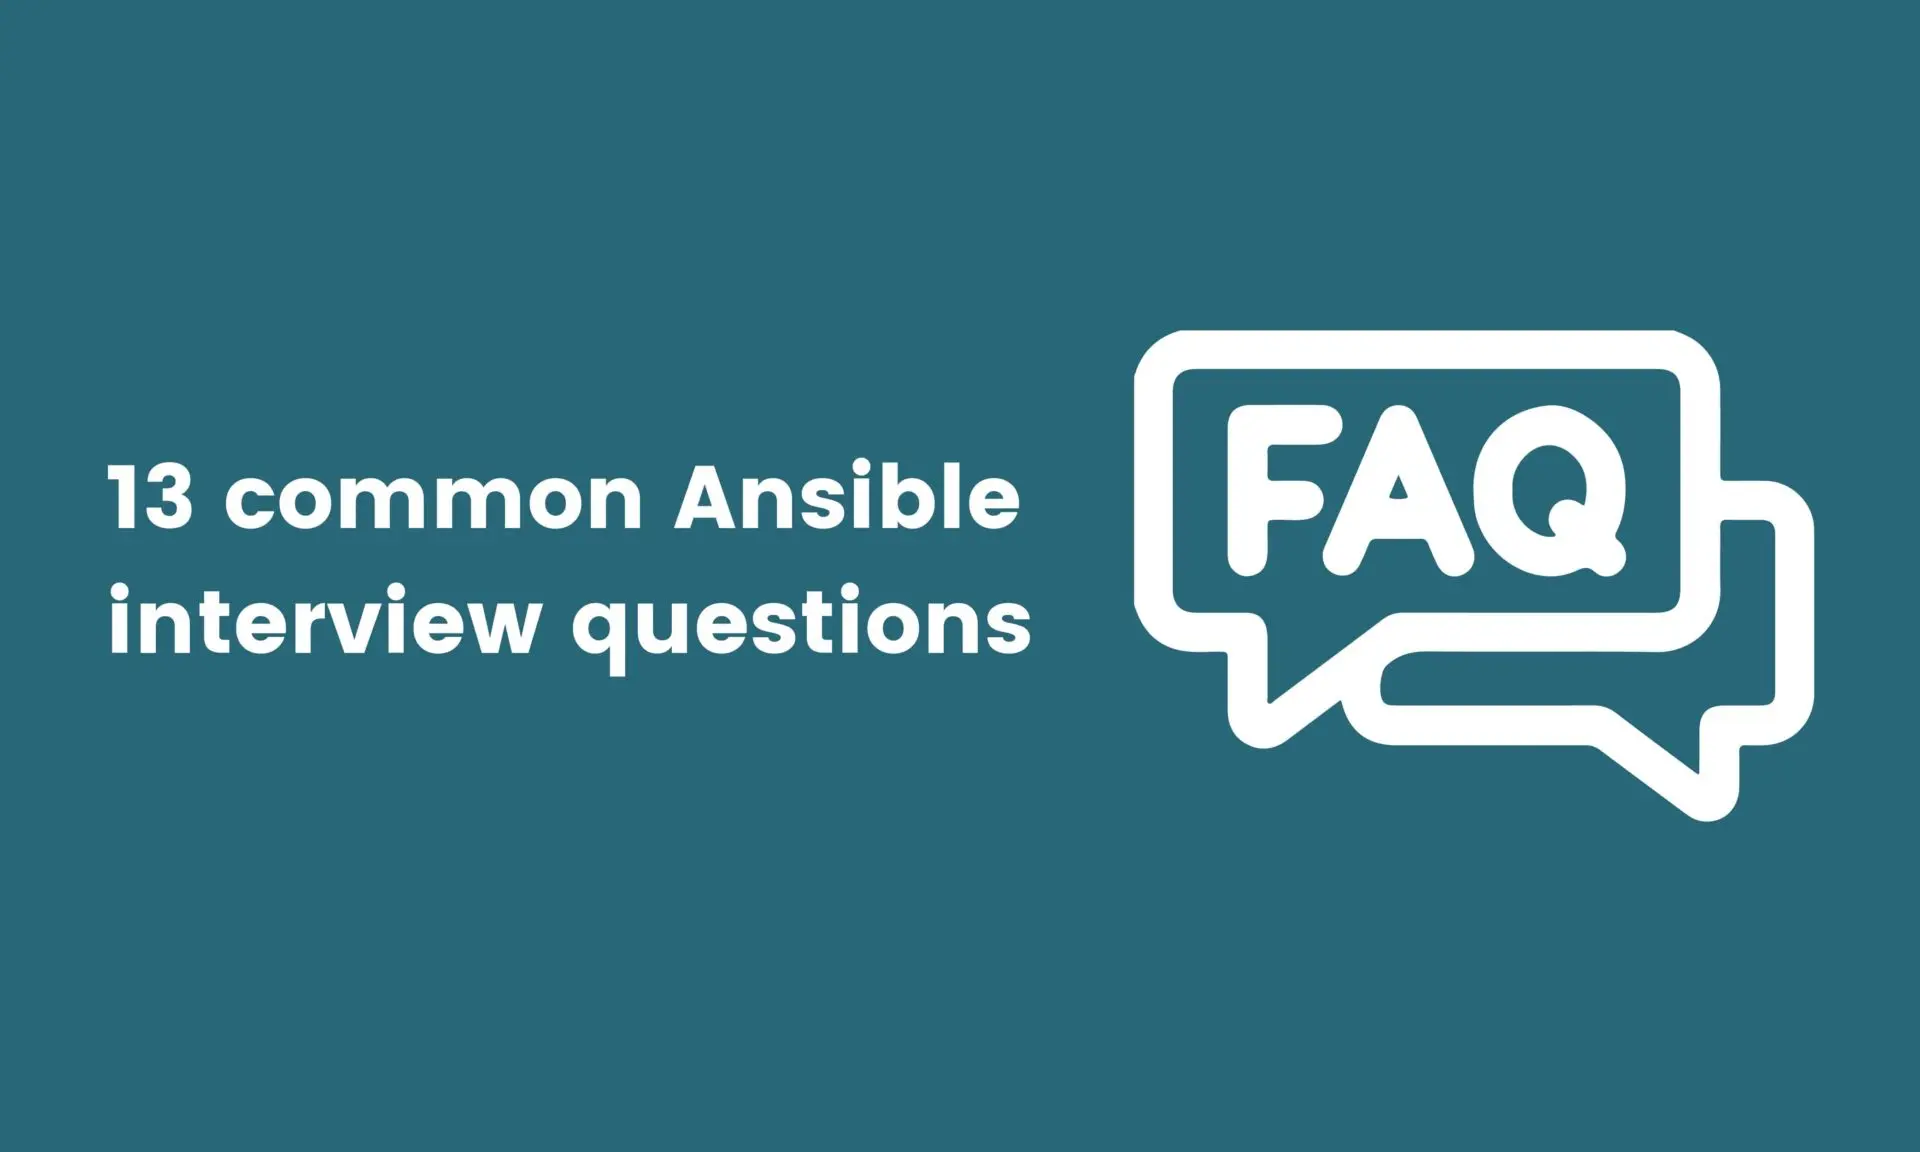 13 common Ansible interview questions